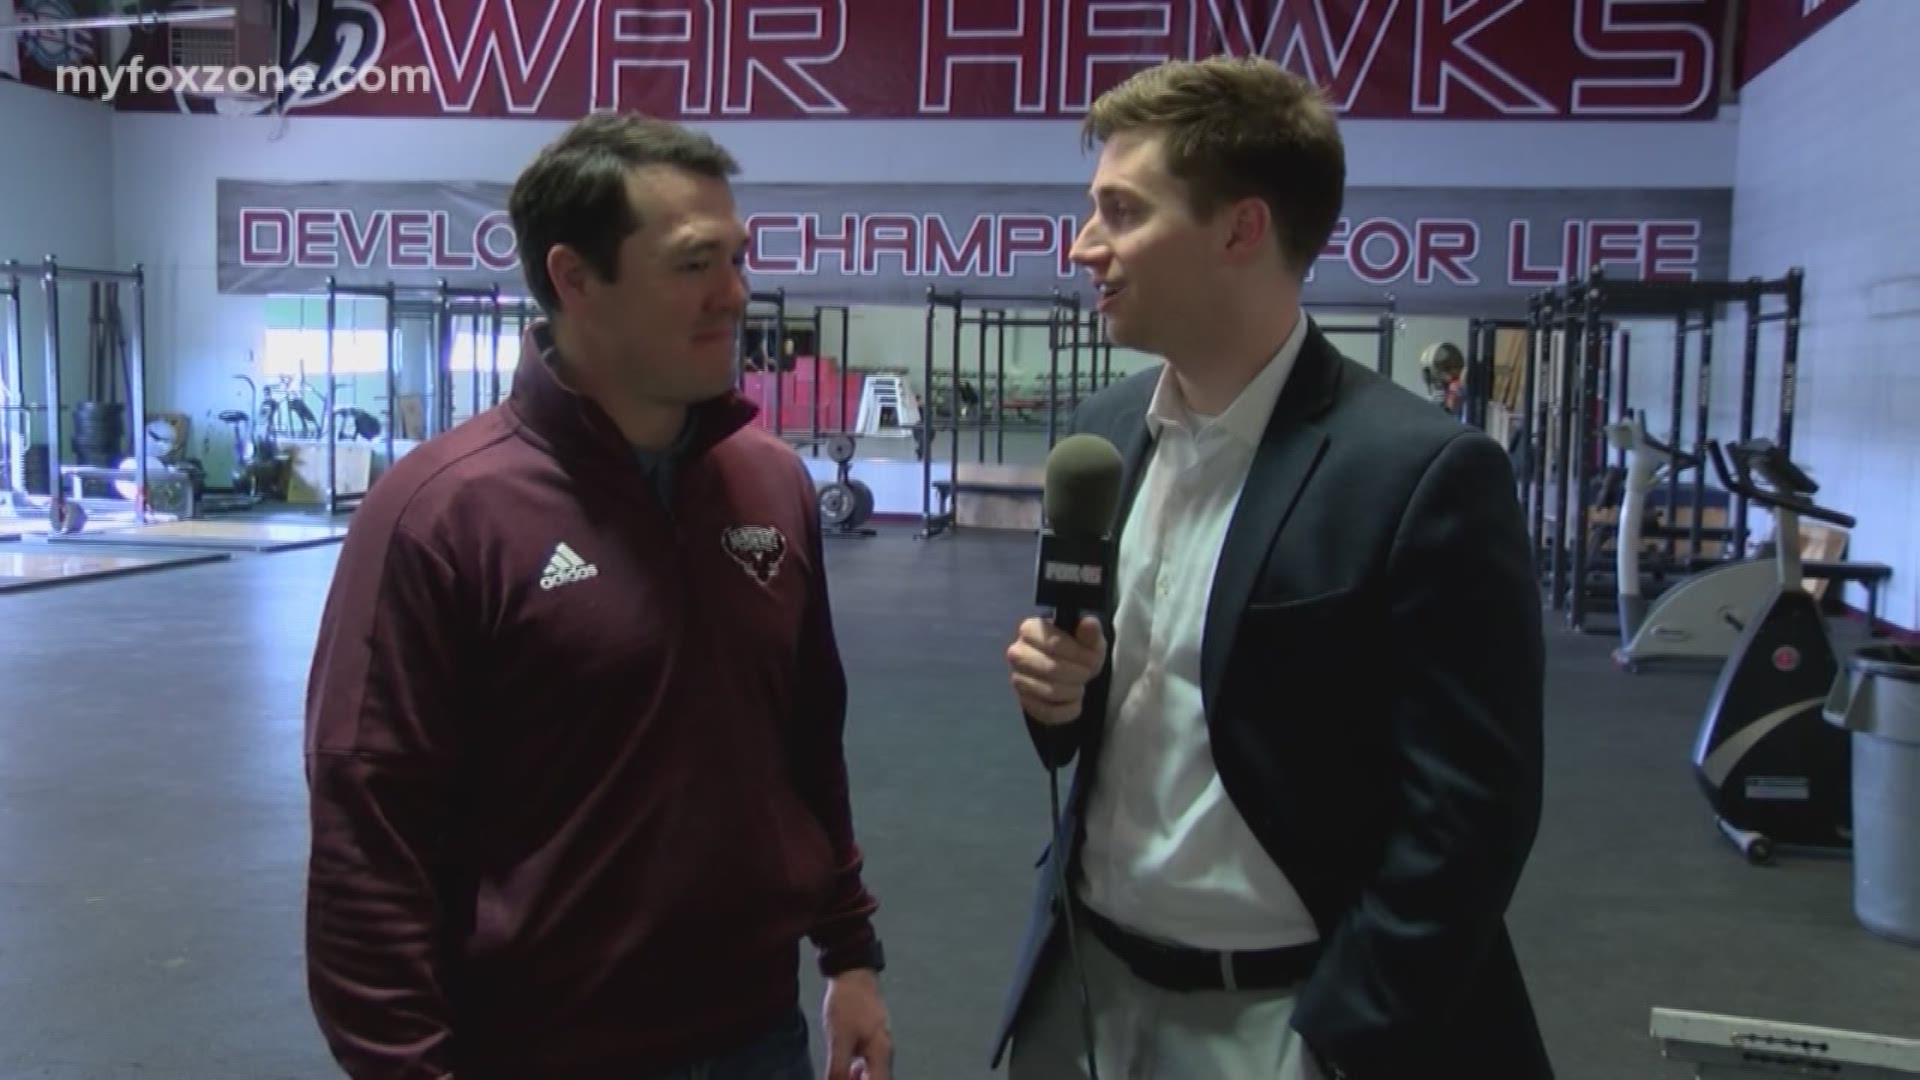 Our Mitchel Summers caught up with the new football coach of the McMurry War Hawks, Jordan Neal. We talked about what his plans are for the team and what the community should know about him.